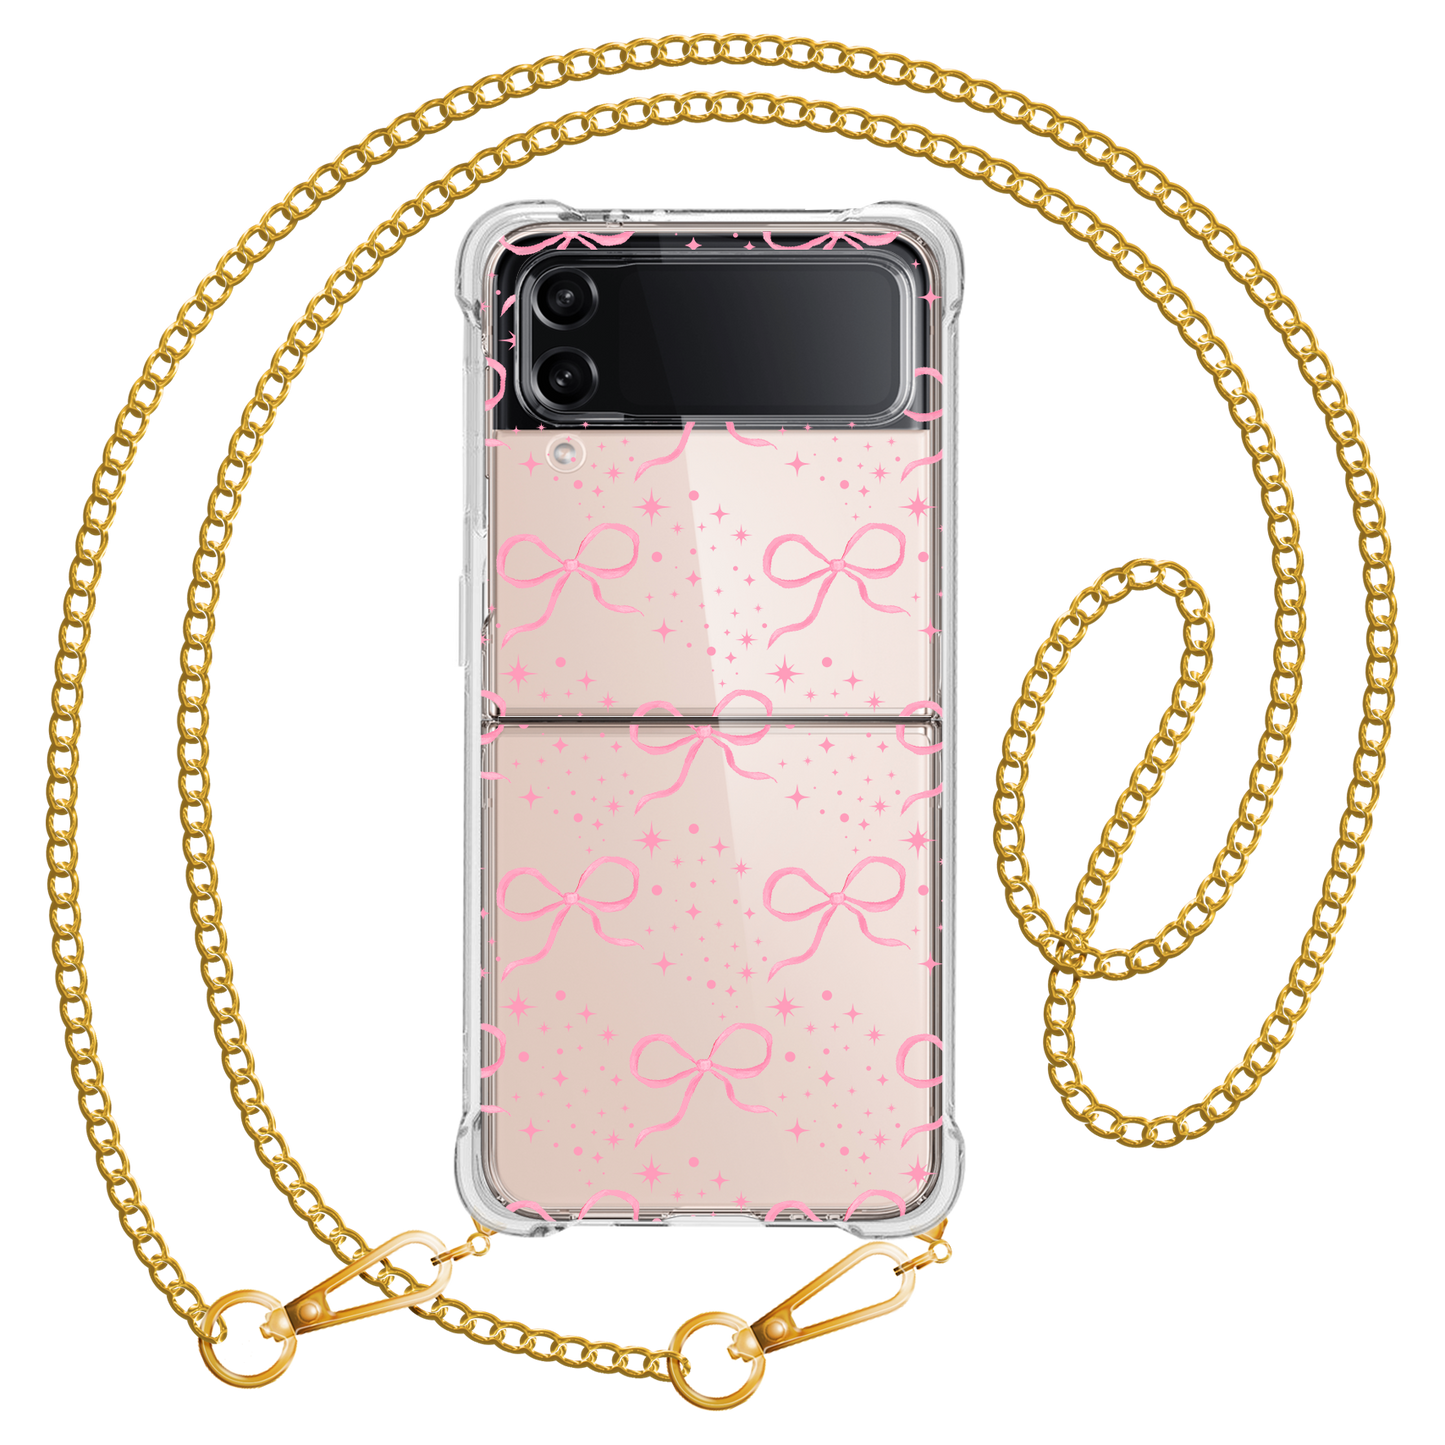 Android Flip / Fold Case - Coquette Glittery Bow